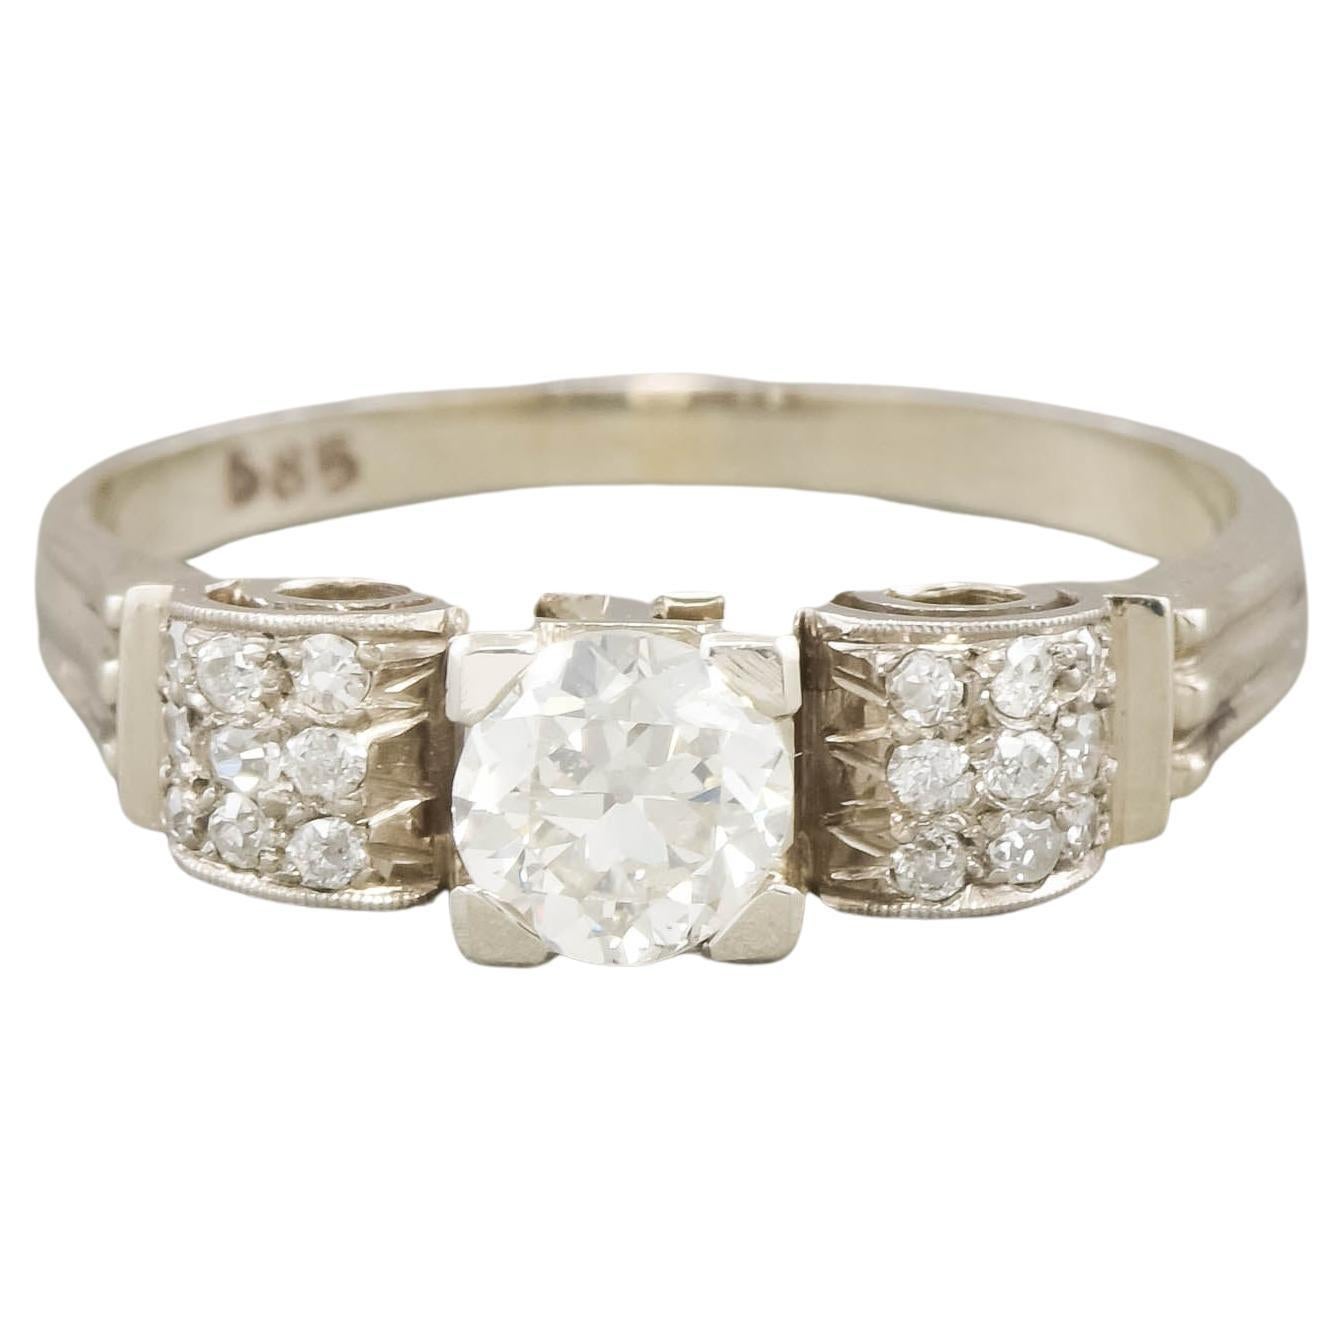 1930's Old European Cut Diamond Engagement Ring in White Gold For Sale